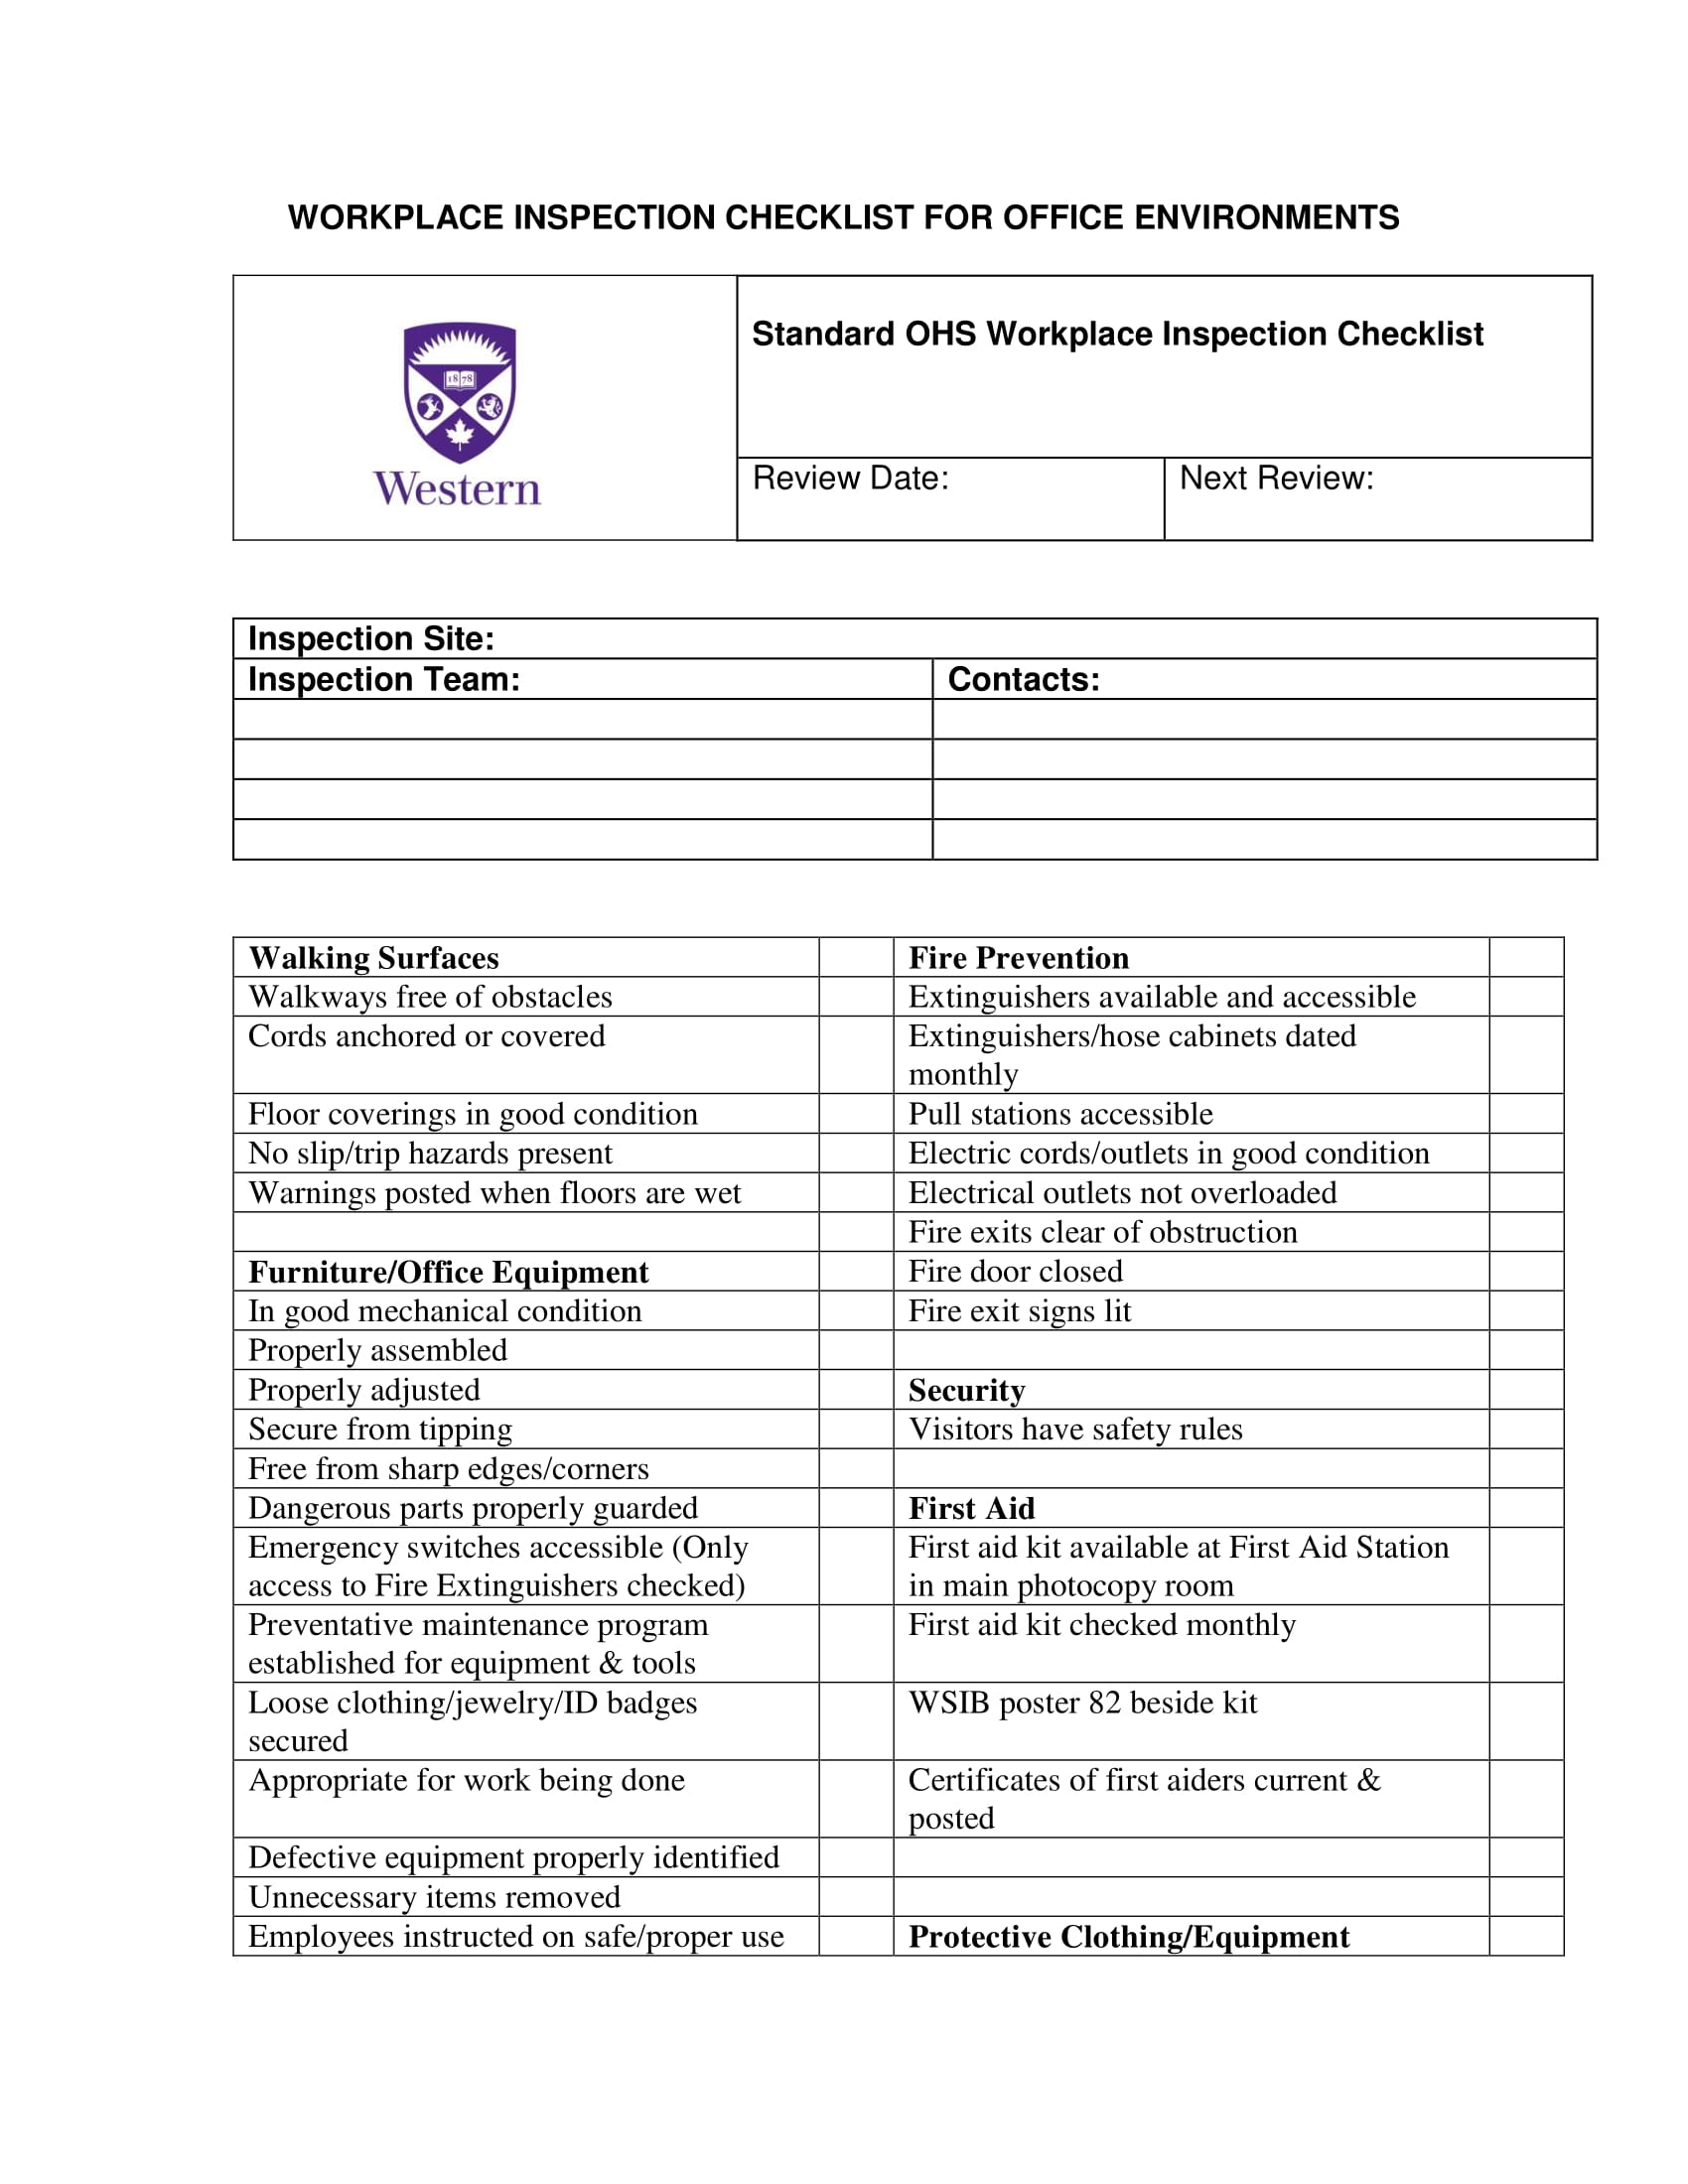 10+ Workplace Inspection Checklist Examples - PDF, Word ...